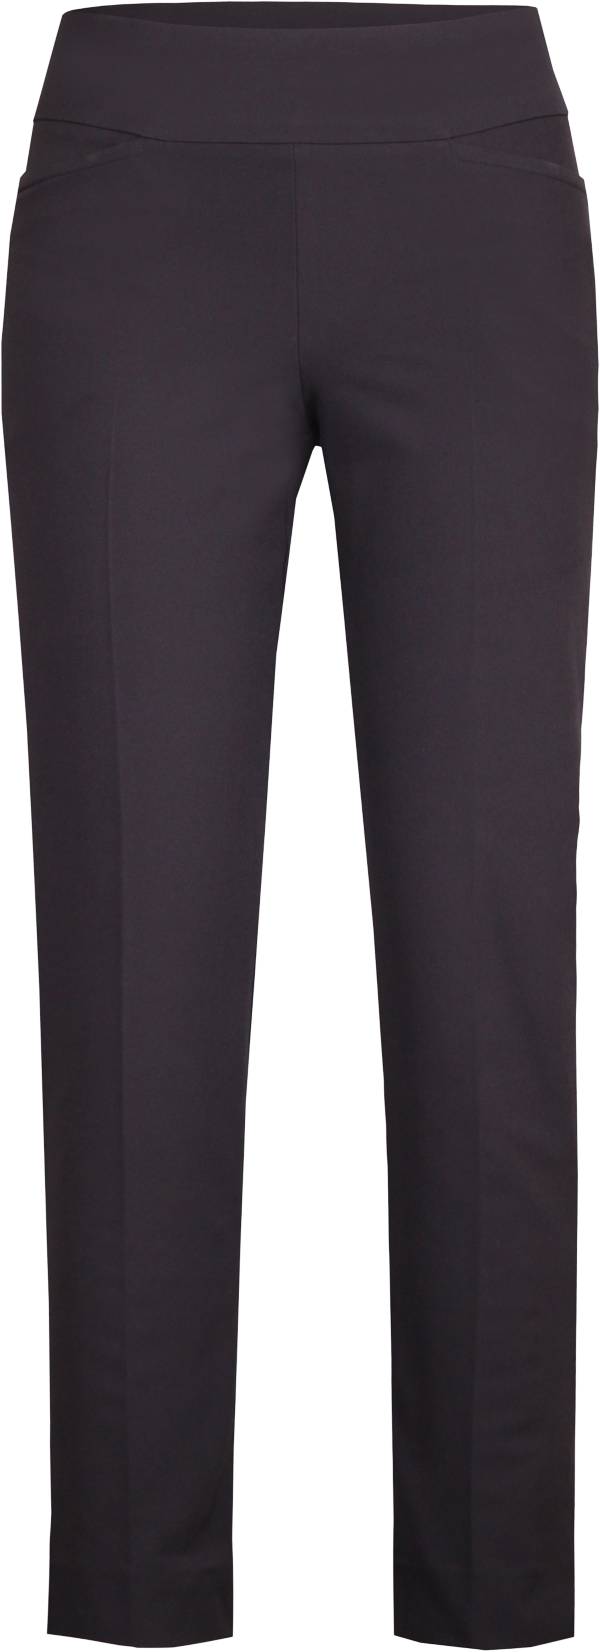 Tail Women's Mulligan Golf Ankle Pants